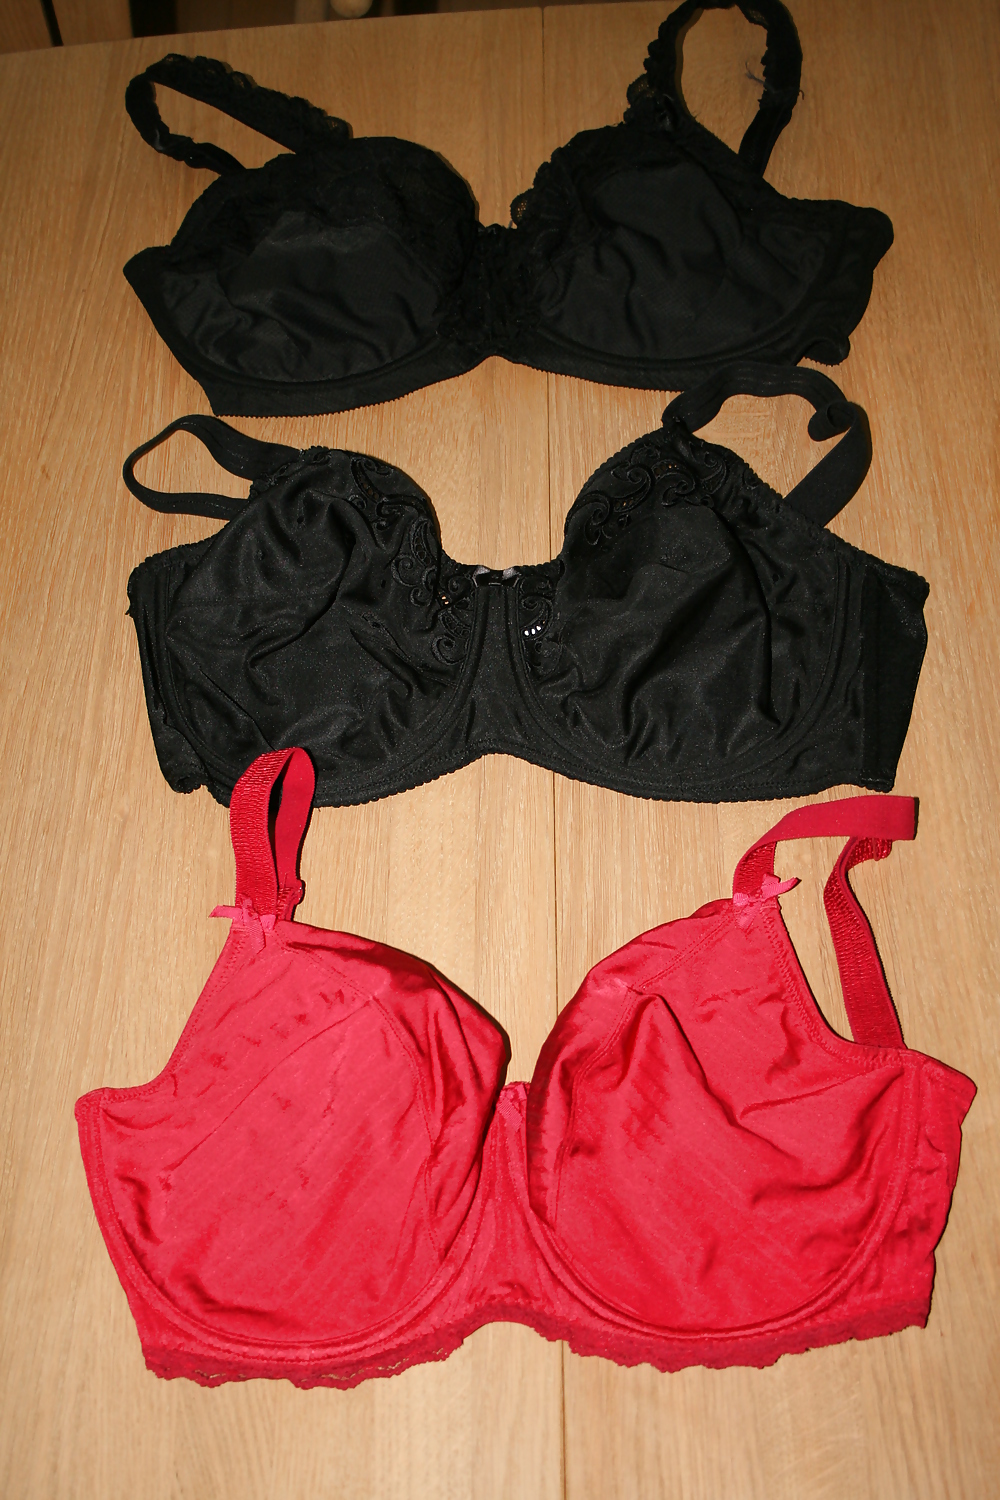 G cup bras and bigger #12082746